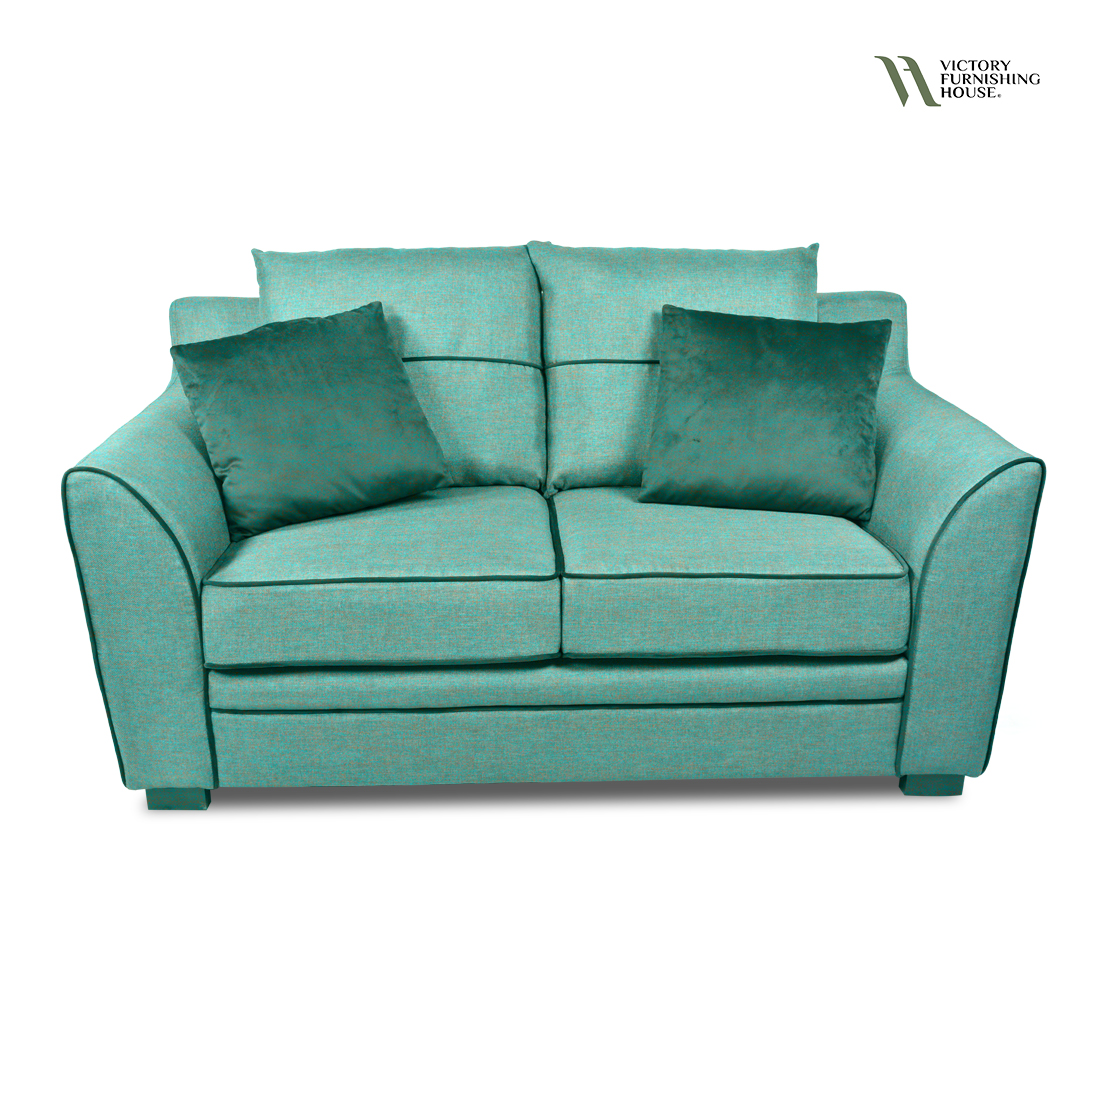 Victoria 2 seater (Turquoise Green)